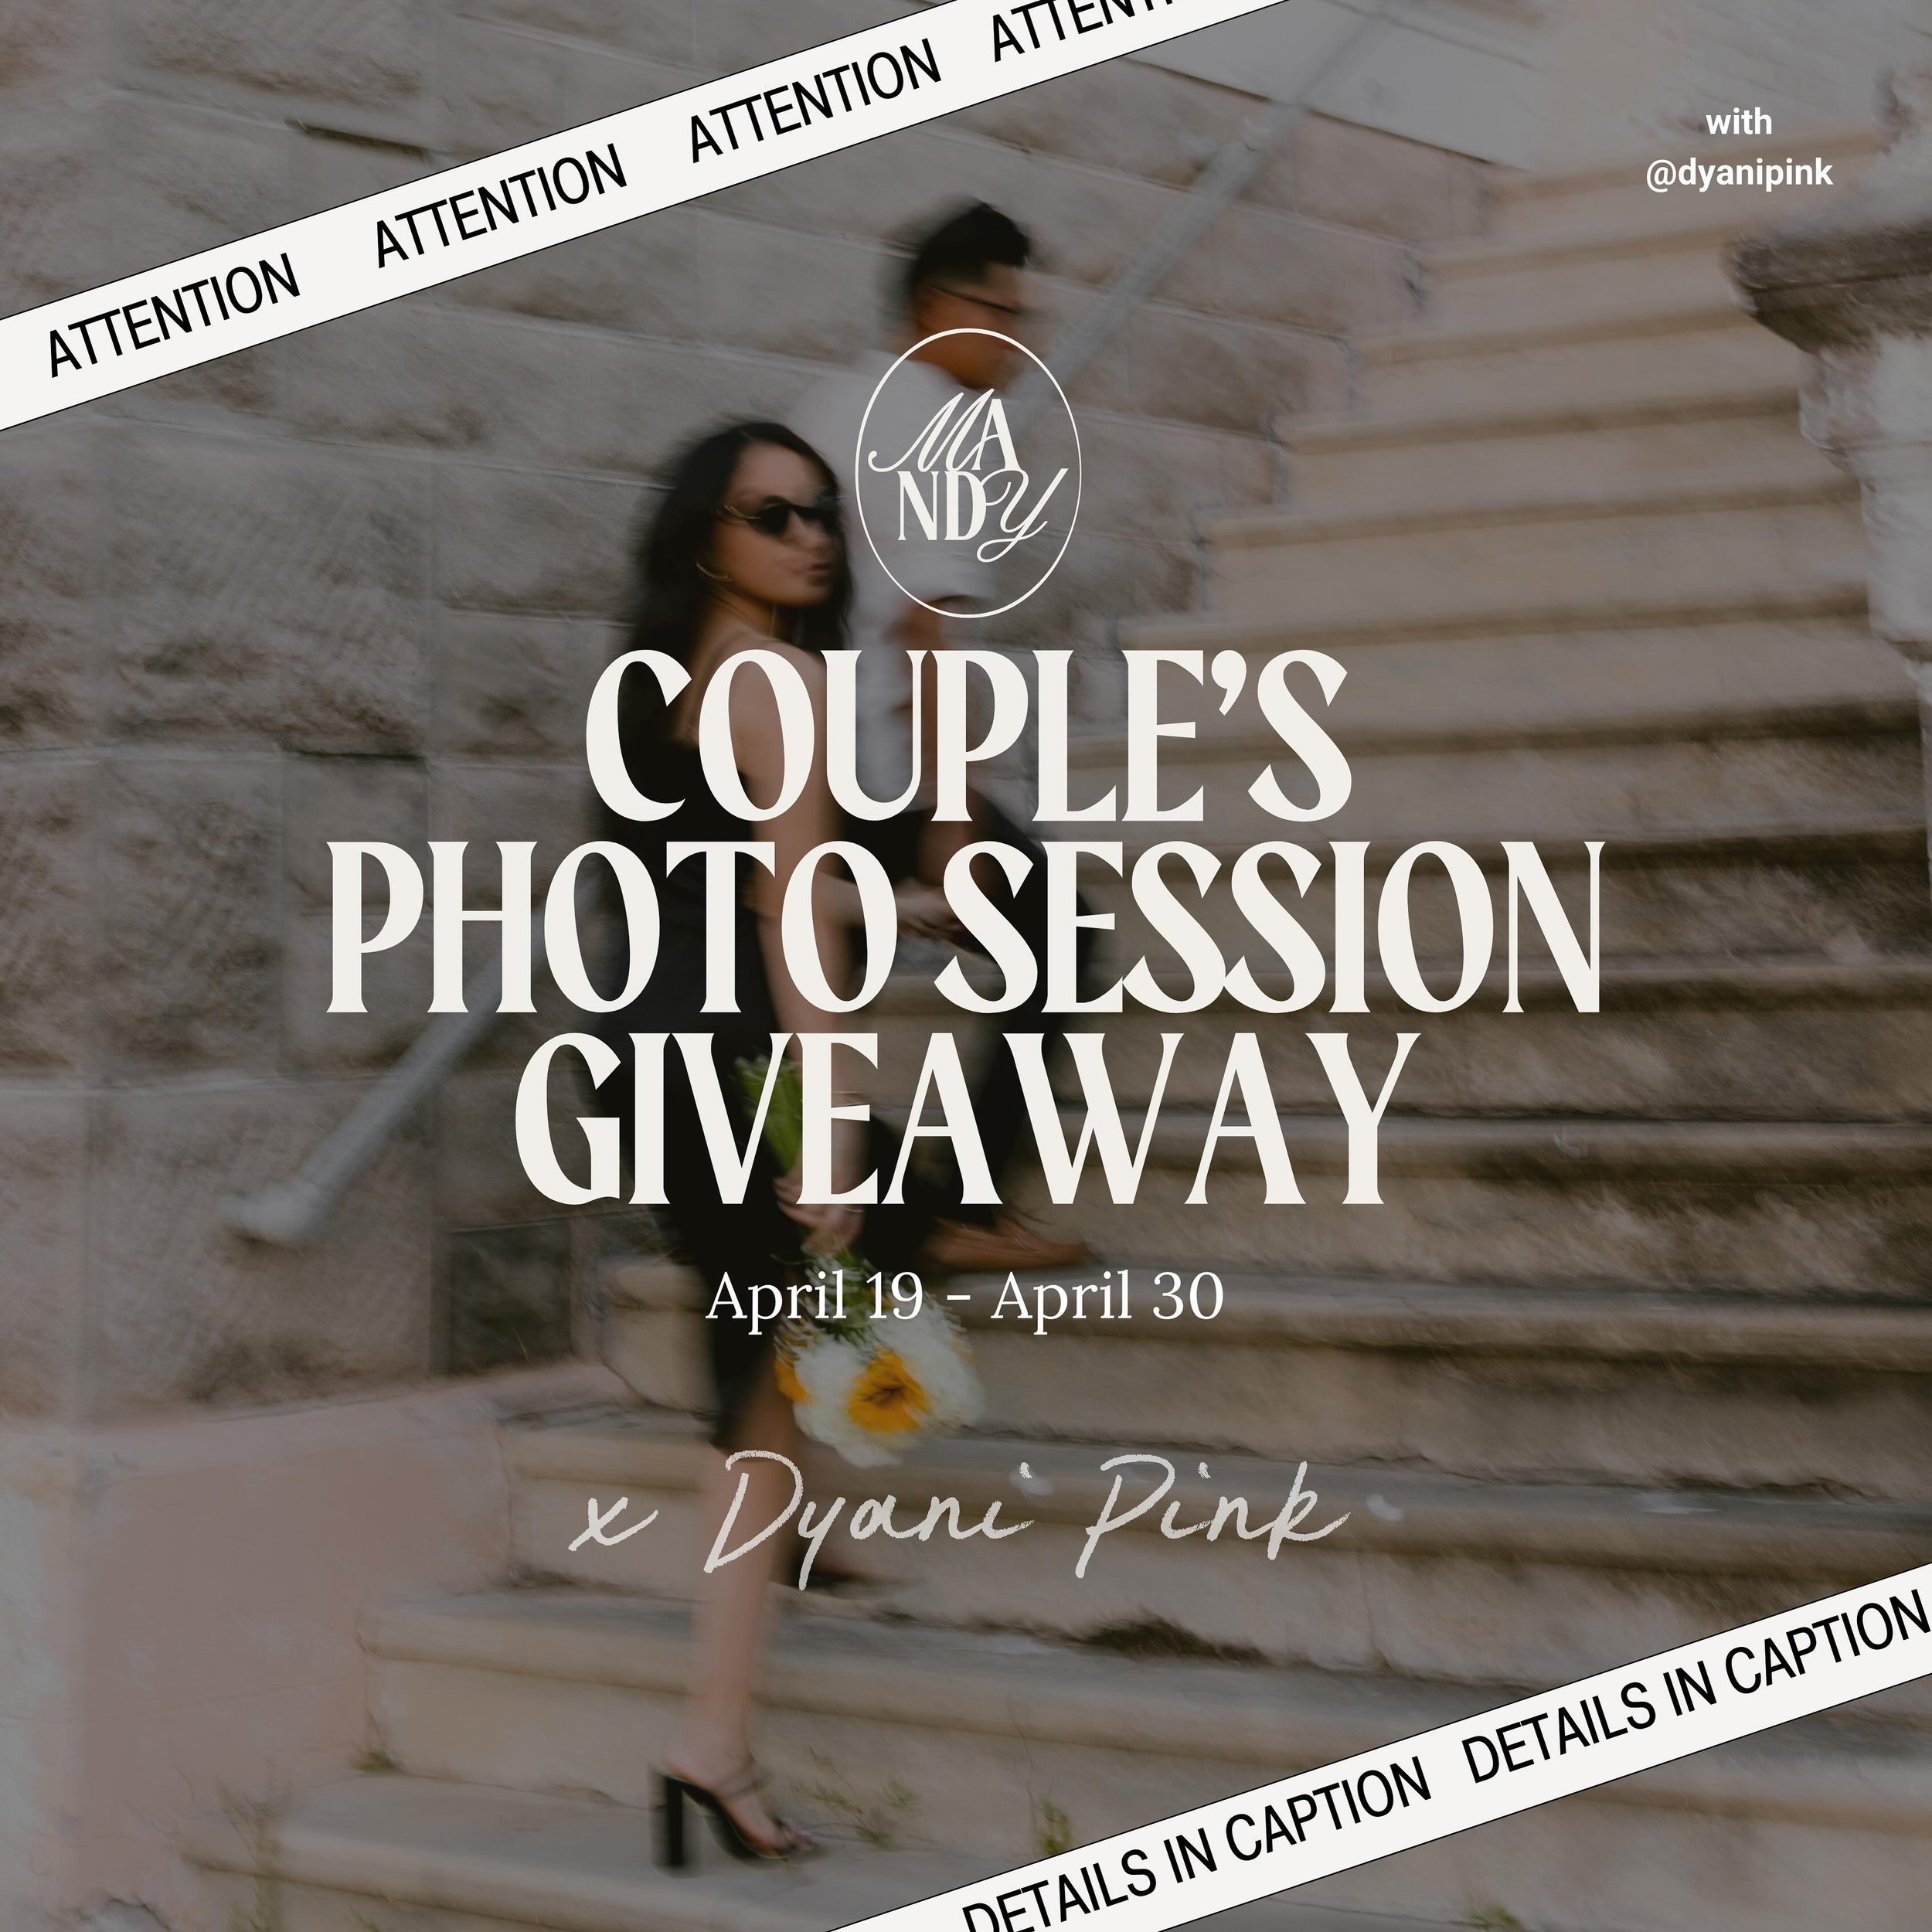 📸 COUPLES PHOTOSHOOT GIVEAWAY! 📸

DYANI PINK and I are teaming up to give one lucky couple a FREE couple's photo session! (You can also gift the winnings to a couple of your choice)

Here's how to enter:
1. Make sure you're following me @mandybphot